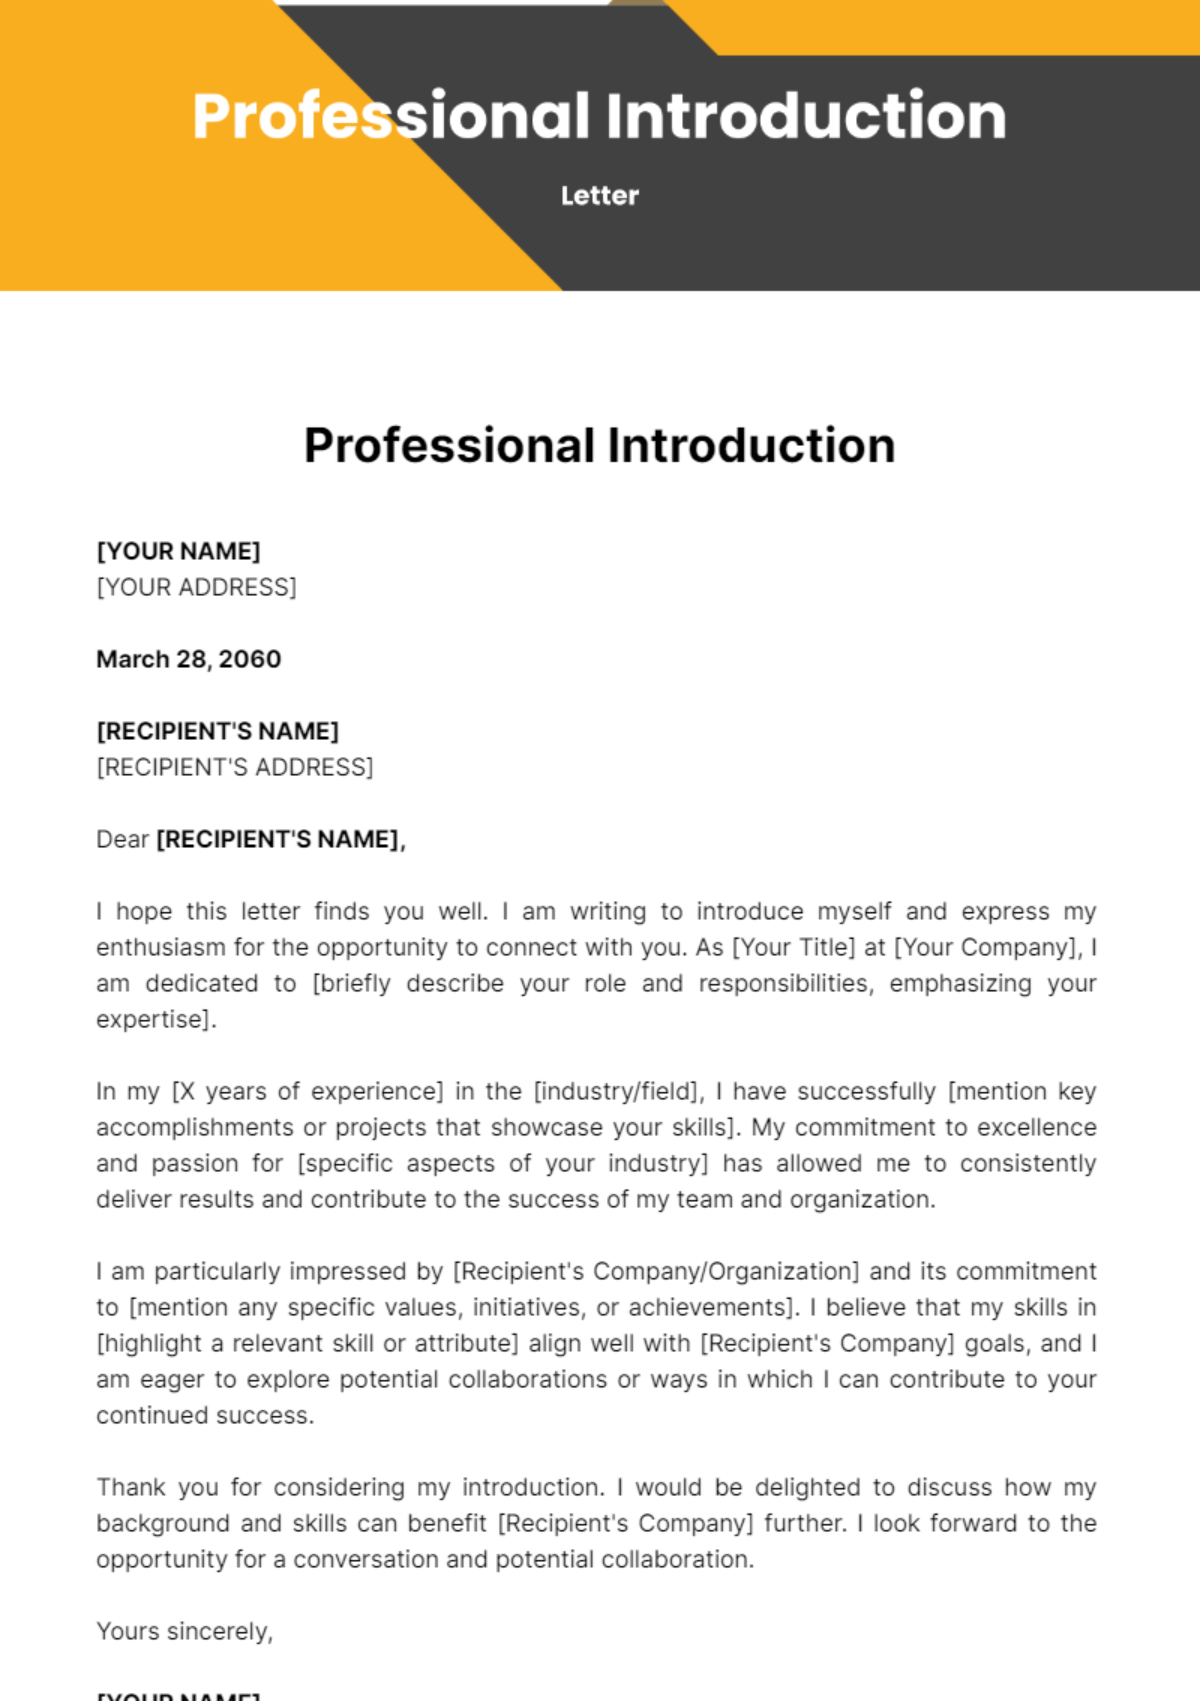 Free Professional Introduction Letter Template